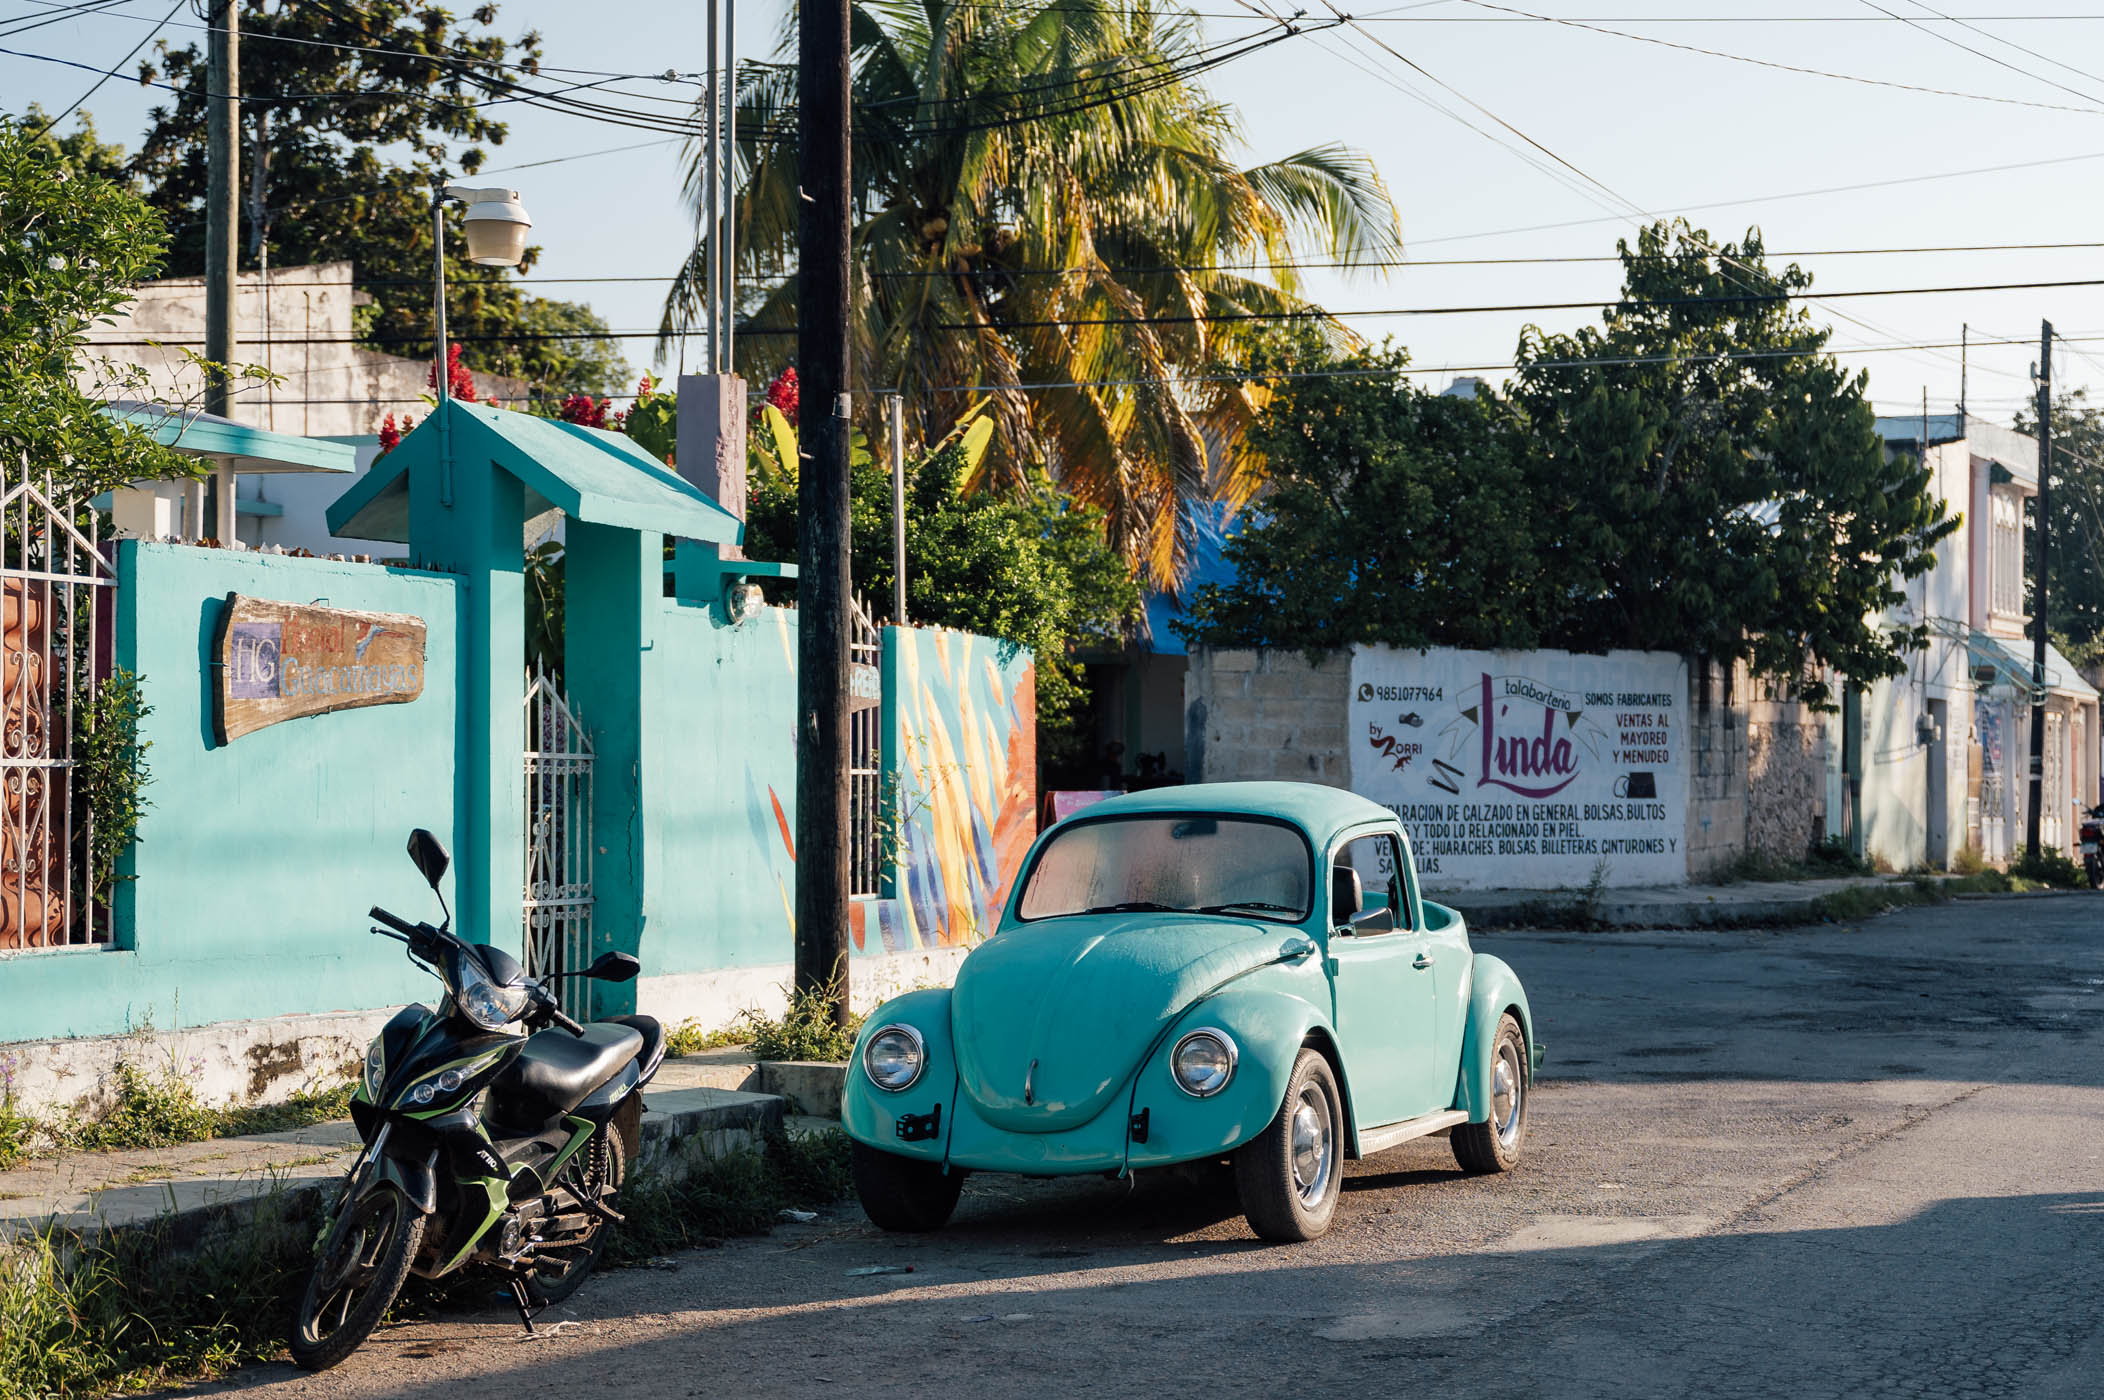 Valladolid street scene with the iconic old VW beetle, that was manufactured in Yucatan, Mexico